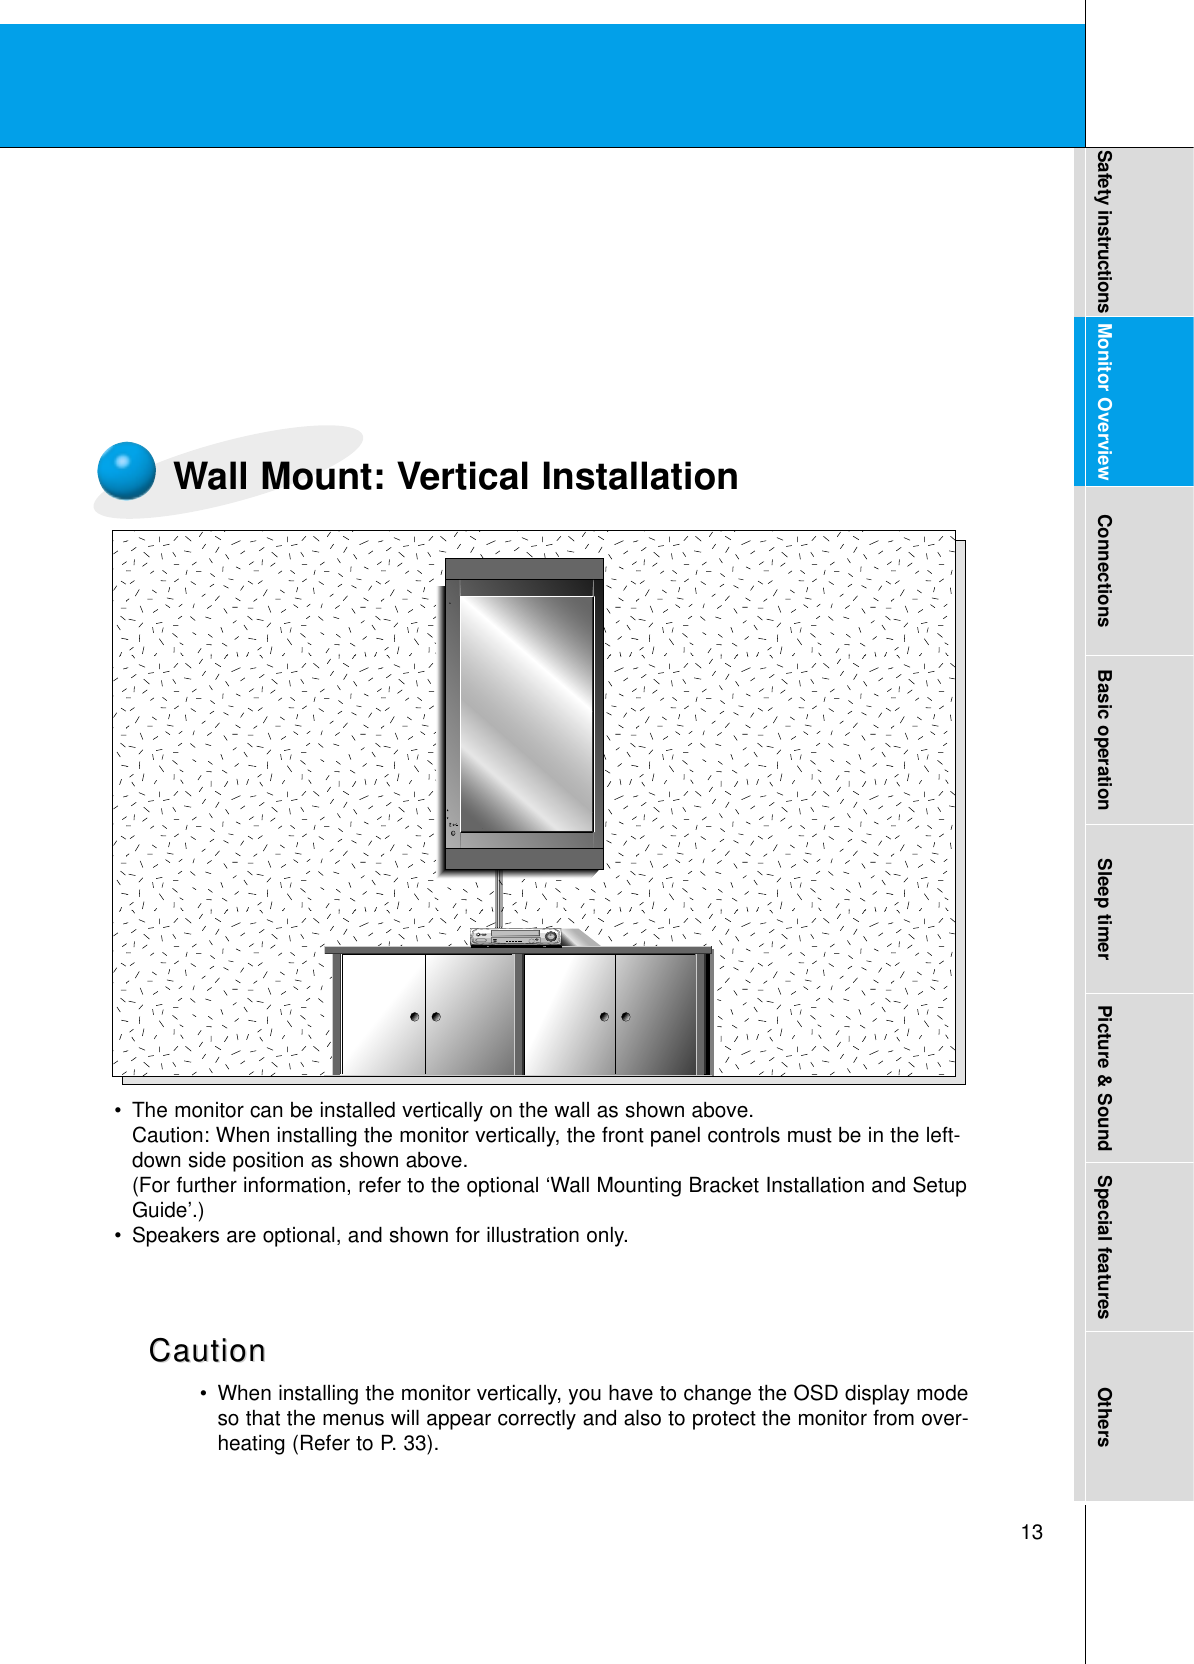 13Safety instructions Monitor Overview Connections Basic operation Sleep timer Picture &amp; Sound Special features OthersWall Mount: Vertical Installation•The monitor can be installed vertically on the wall as shown above.Caution: When installing the monitor vertically, the front panel controls must be in the left-down side position as shown above.(For further information, refer to the optional ‘Wall Mounting Bracket Installation and SetupGuide’.)•Speakers are optional, and shown for illustration only.•When installing the monitor vertically, you have to change the OSD display modeso that the menus will appear correctly and also to protect the monitor from over-heating (Refer to P. 33).CautionCaution